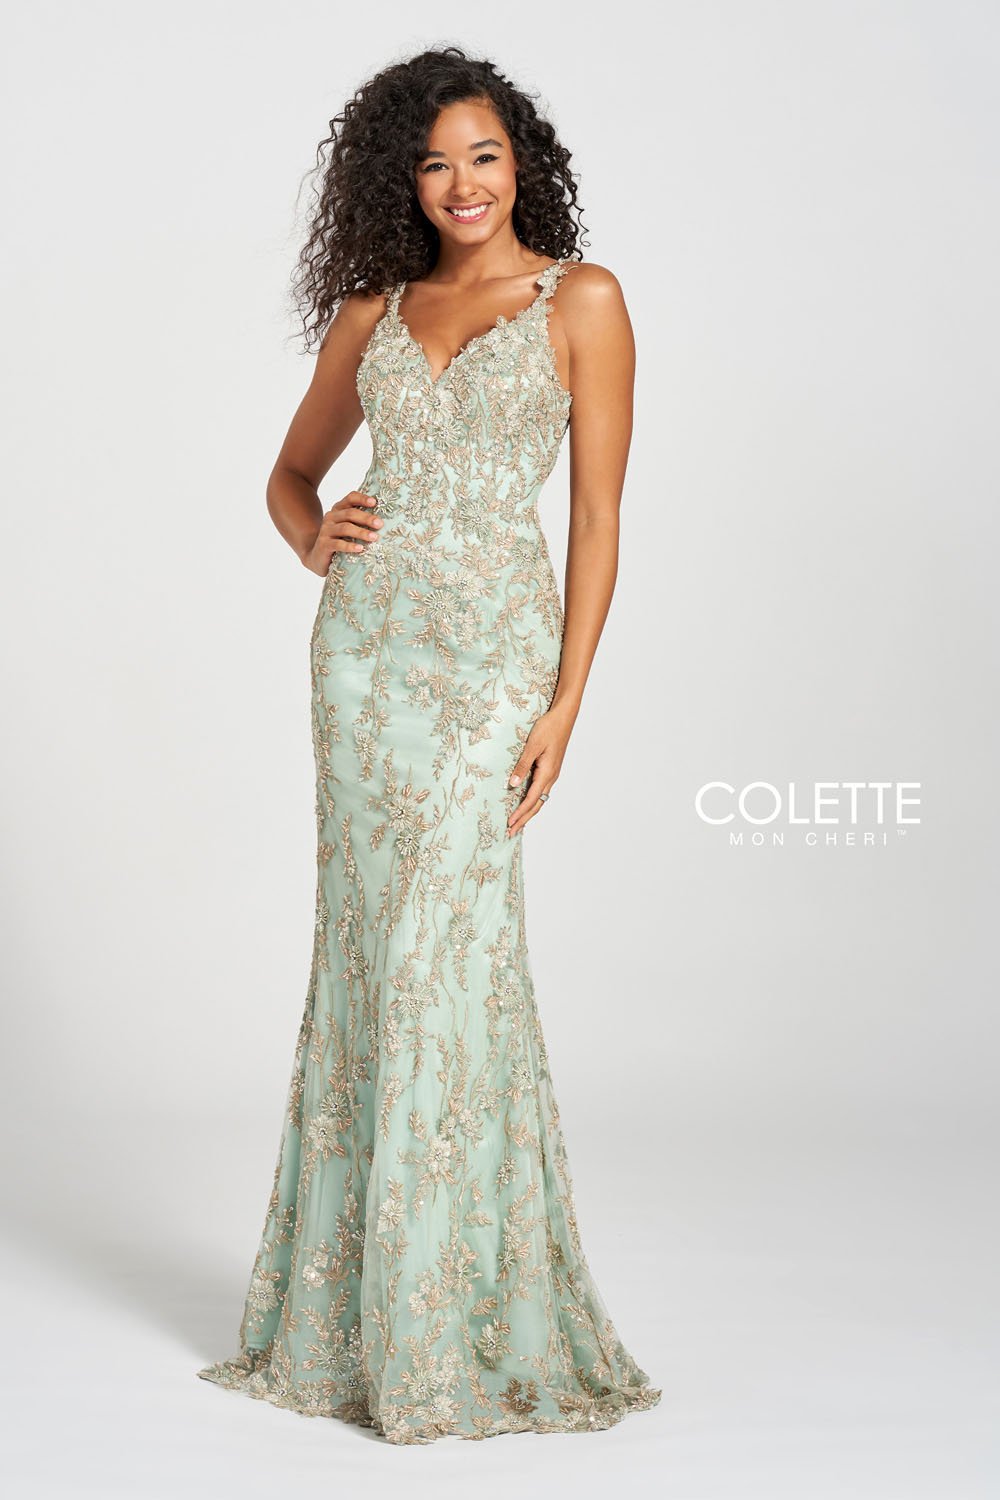 Colette CL12203 Ivy prom dresses.  Ivy prom dresses image by Colette.